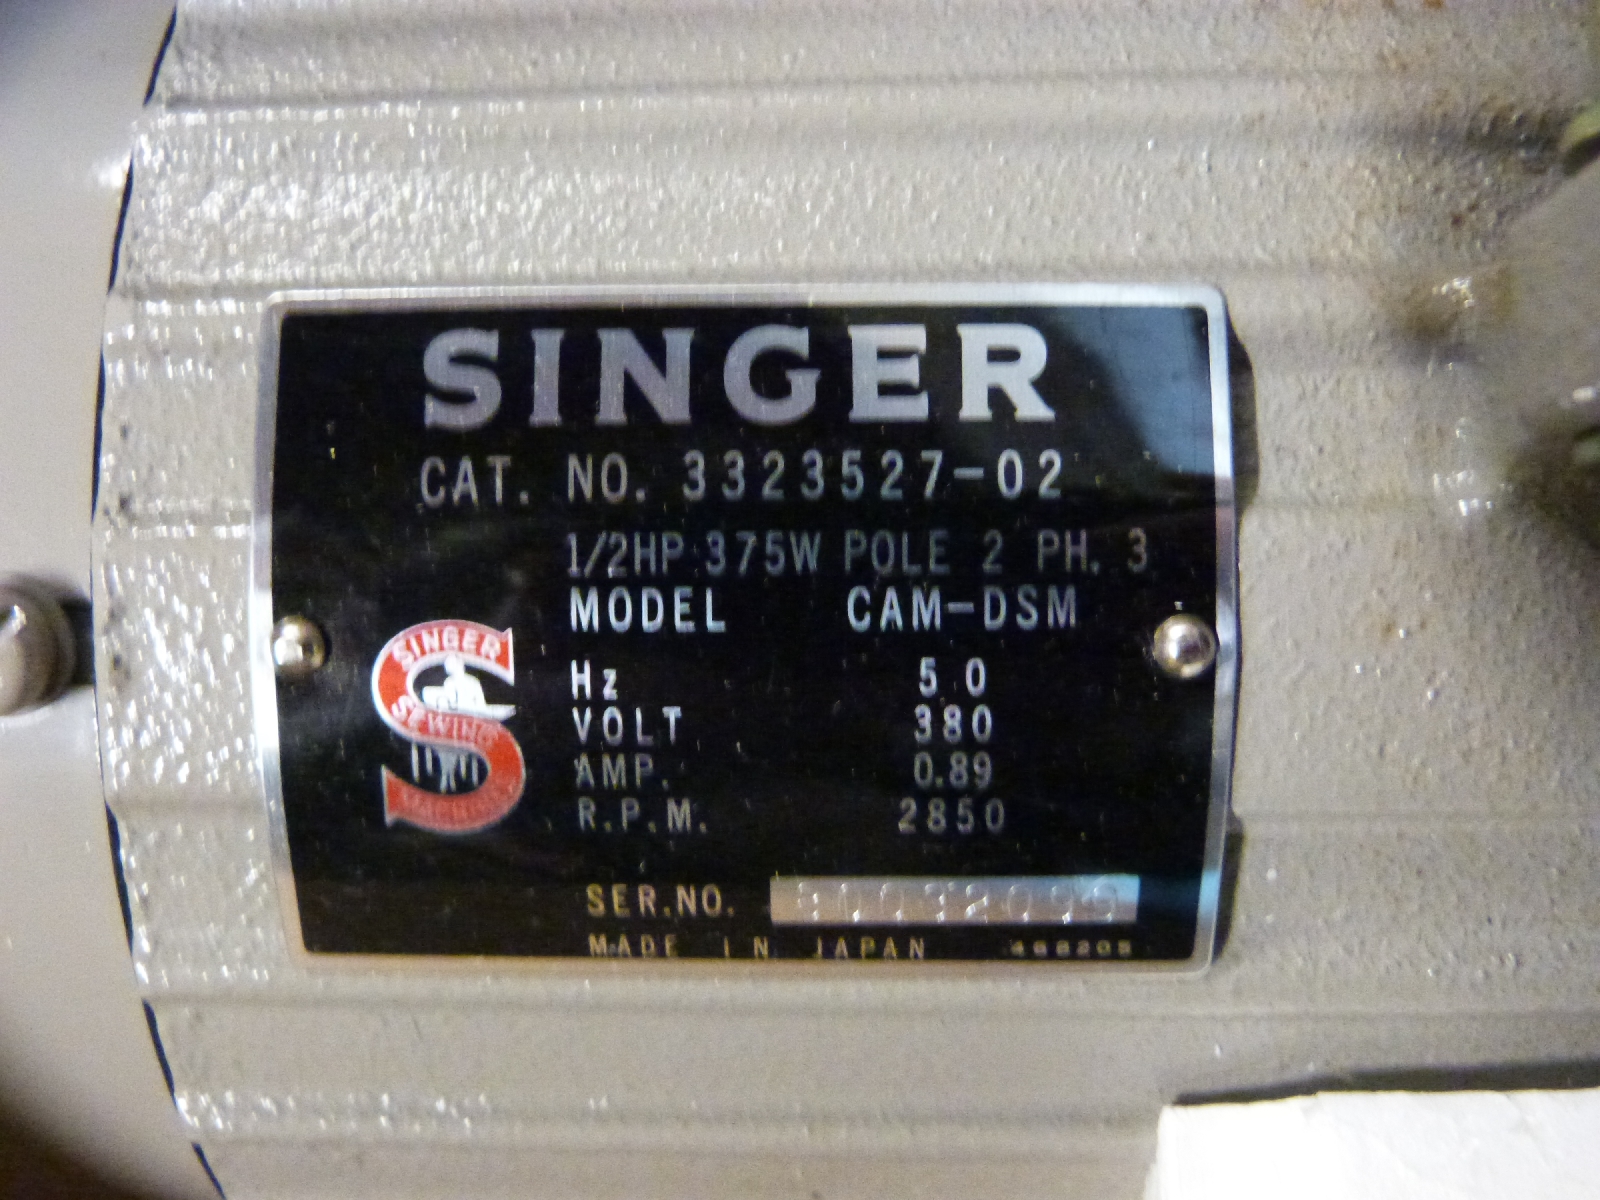 A Singer sewing machine unused ½ HP electric motor in box with instruction leaflet - Image 2 of 2